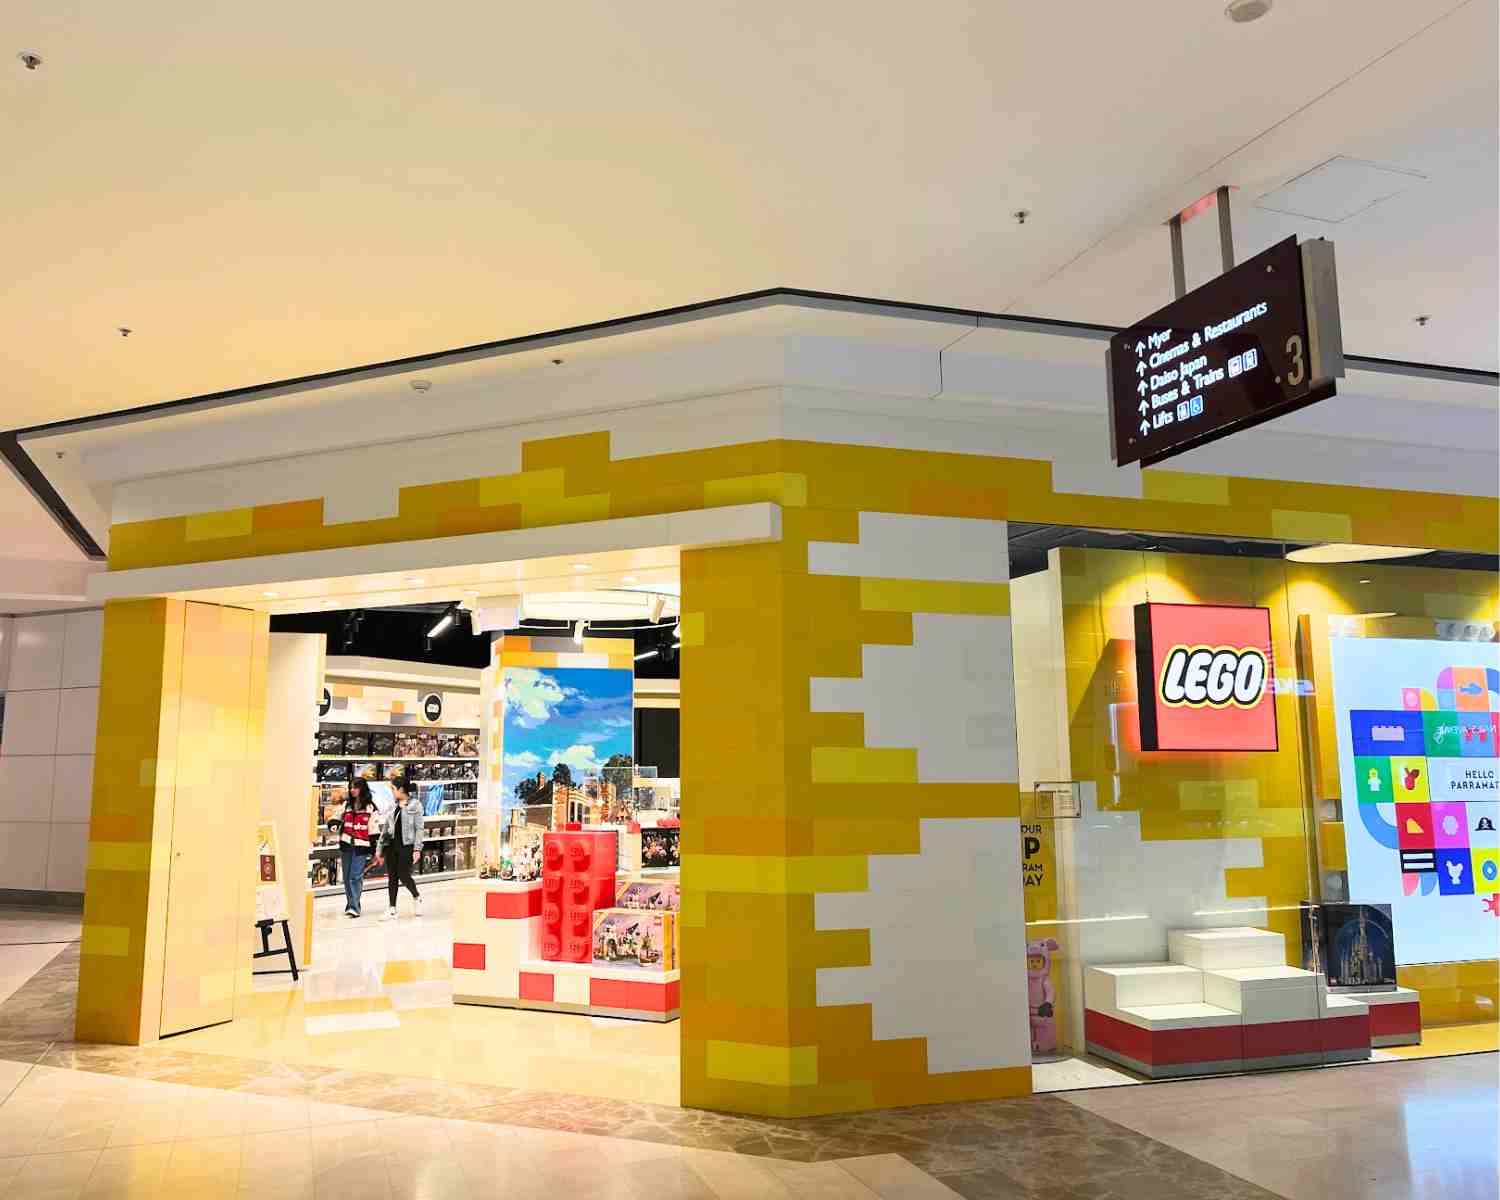 LEGO stores in Sydney are everywhere